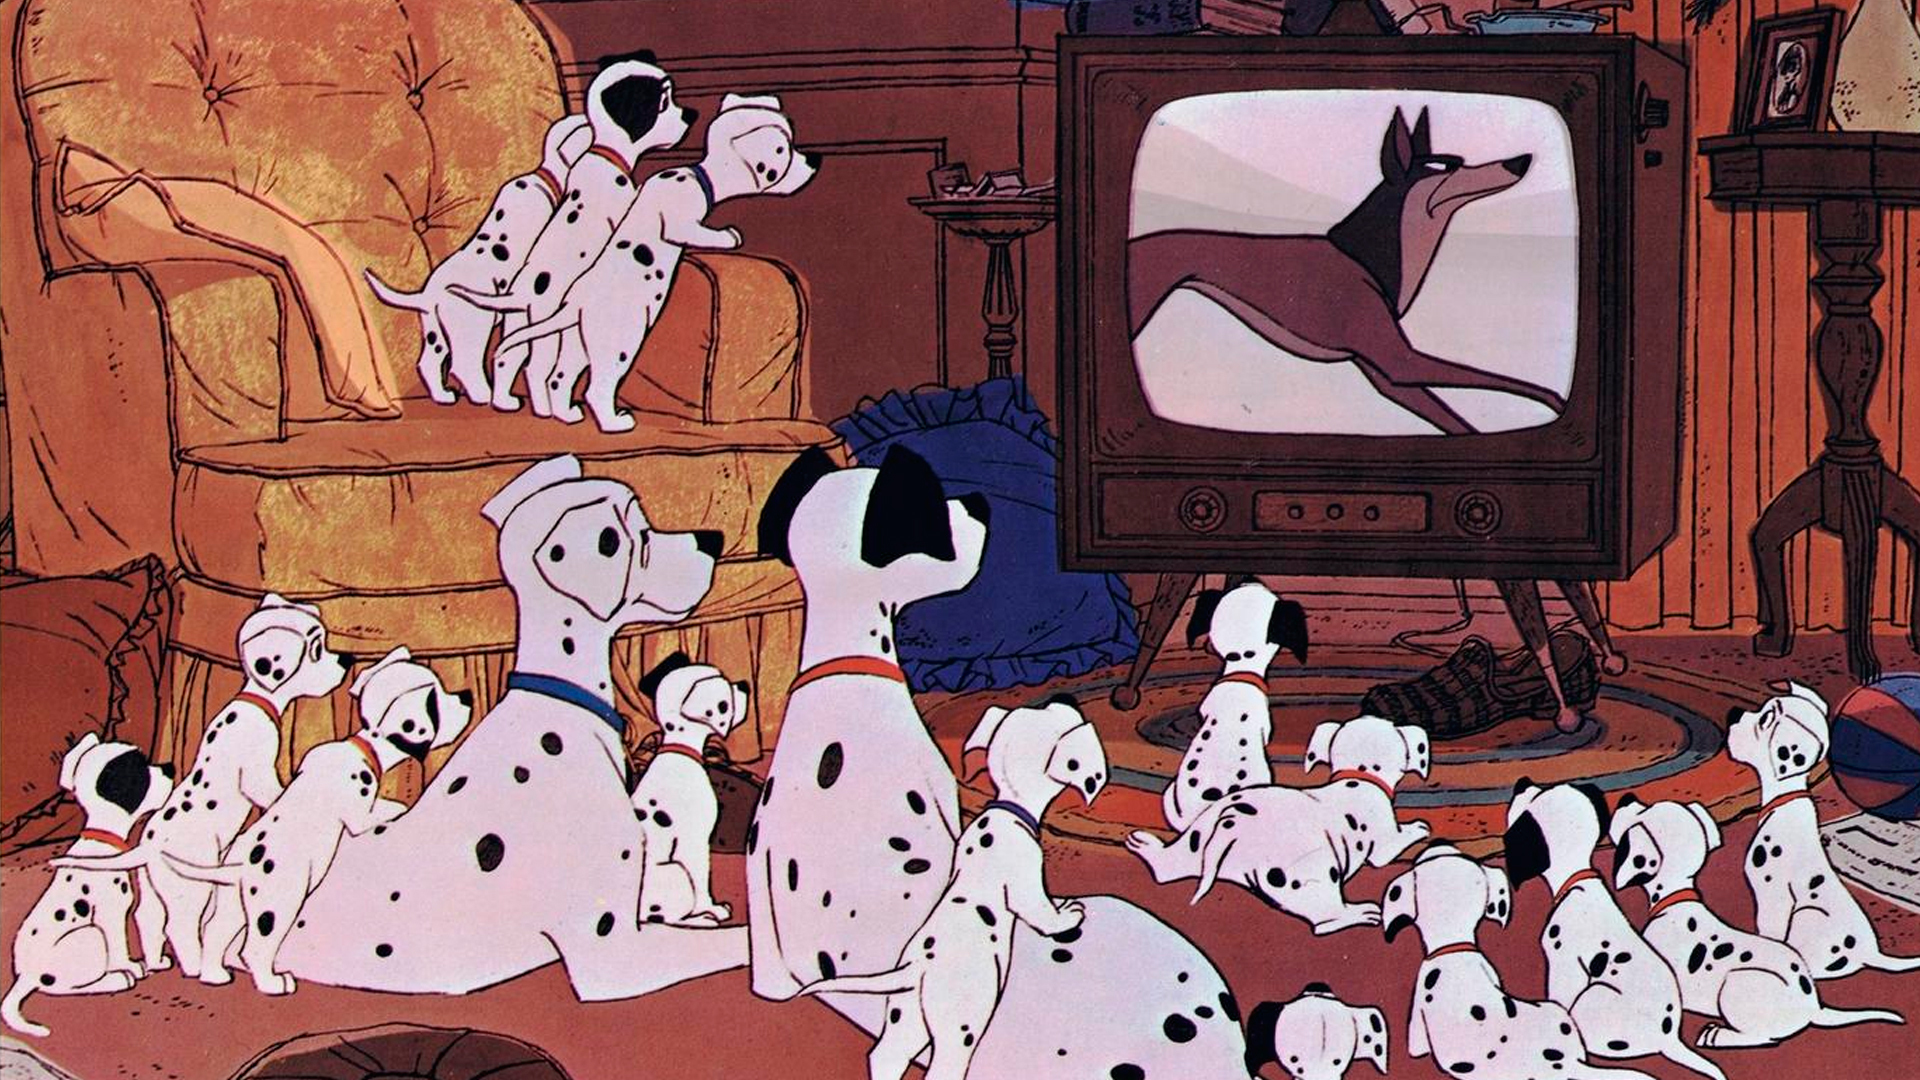 <p>It may seem like fun and games in the film, but having 101 dogs would actually be a nightmare, so kudos and best of luck to Roger and Anita Radcliffe, who take in the mutts after they (the dogs, not the humans) defeat Cruella De Vil at the end of “One Hundred and One Dalmatians.” A plethora of well-known actors were brought in to provide the voices in this 1961 animated Disney film, but the most famous was probably Rod Taylor, who voiced the dog Pongo.</p><p><a href='https://www.msn.com/en-us/community/channel/vid-cj9pqbr0vn9in2b6ddcd8sfgpfq6x6utp44fssrv6mc2gtybw0us'>Follow us on MSN to see more of our exclusive entertainment content.</a></p>